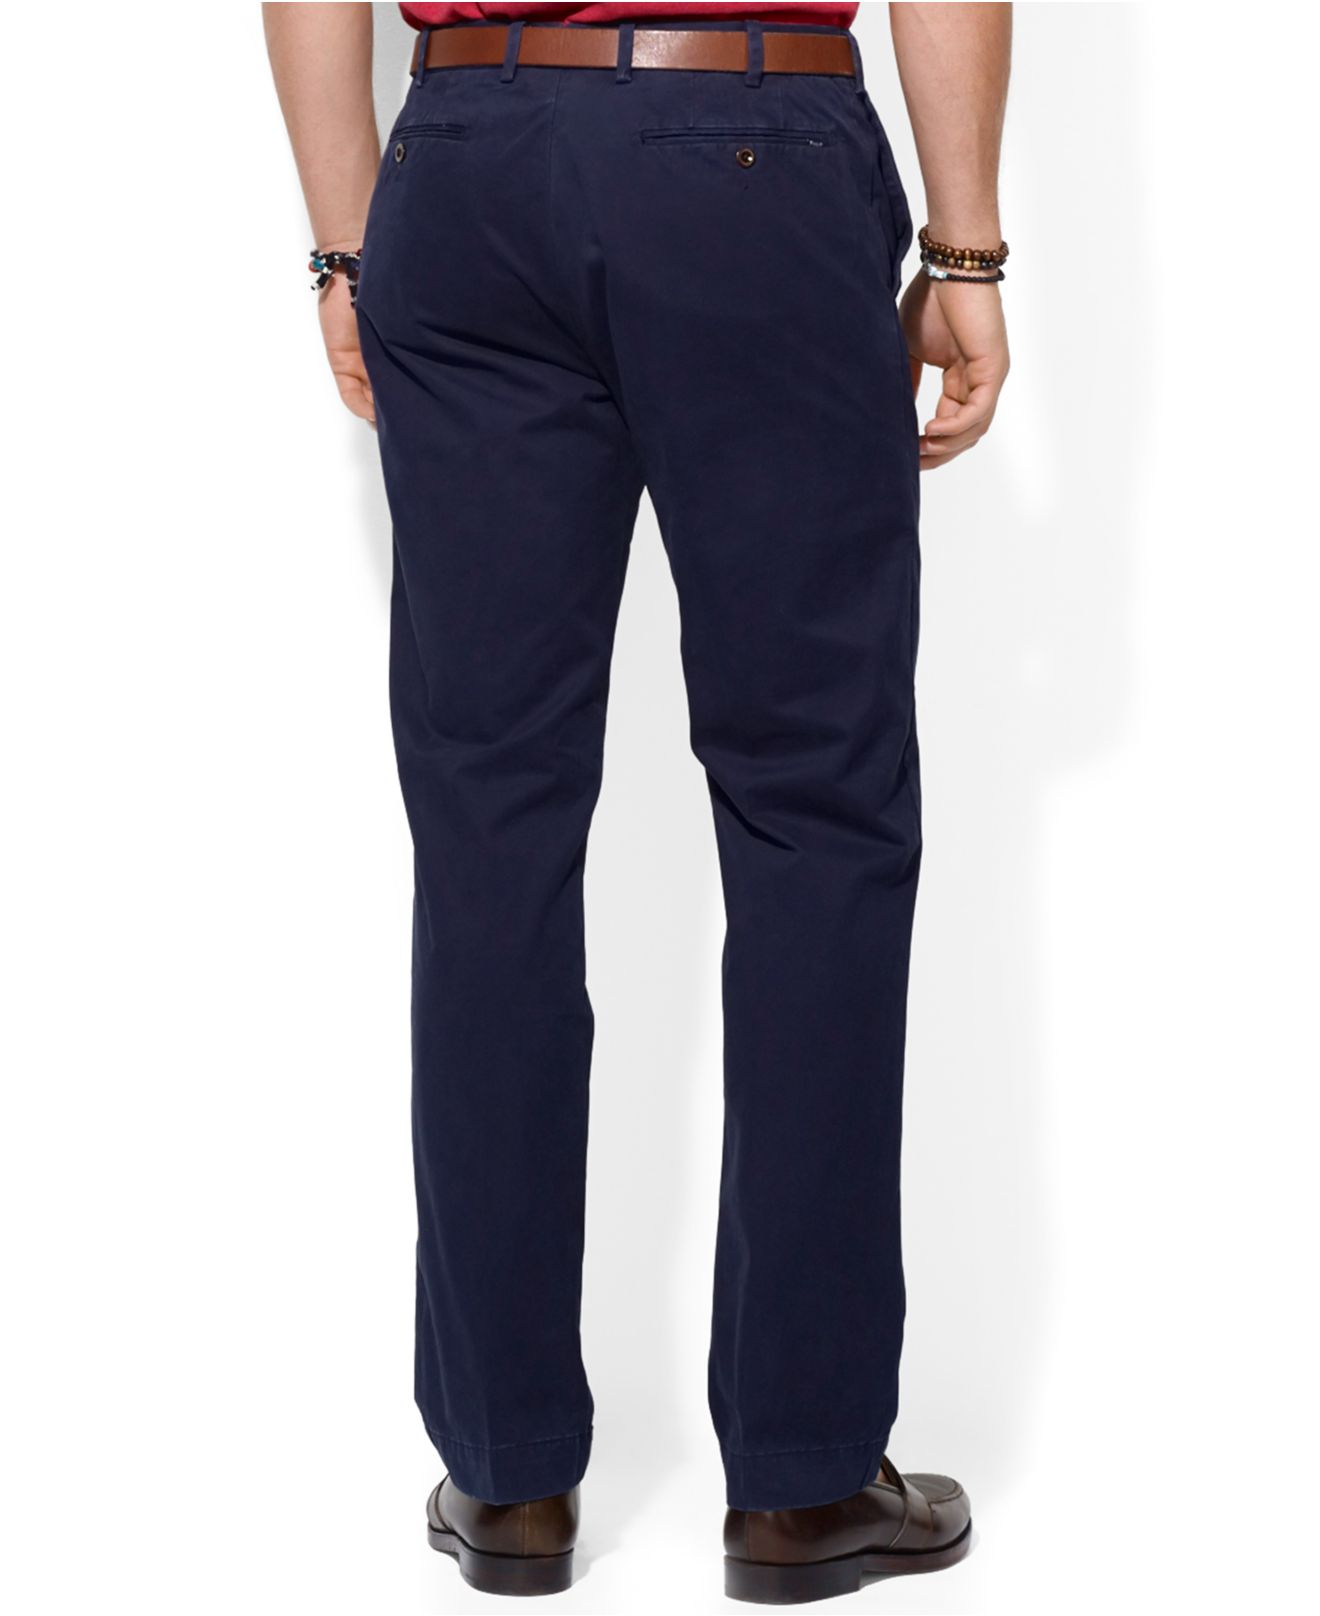 Lyst - Polo Ralph Lauren Straight-Fit Hudson Chino Pants in Blue for Men